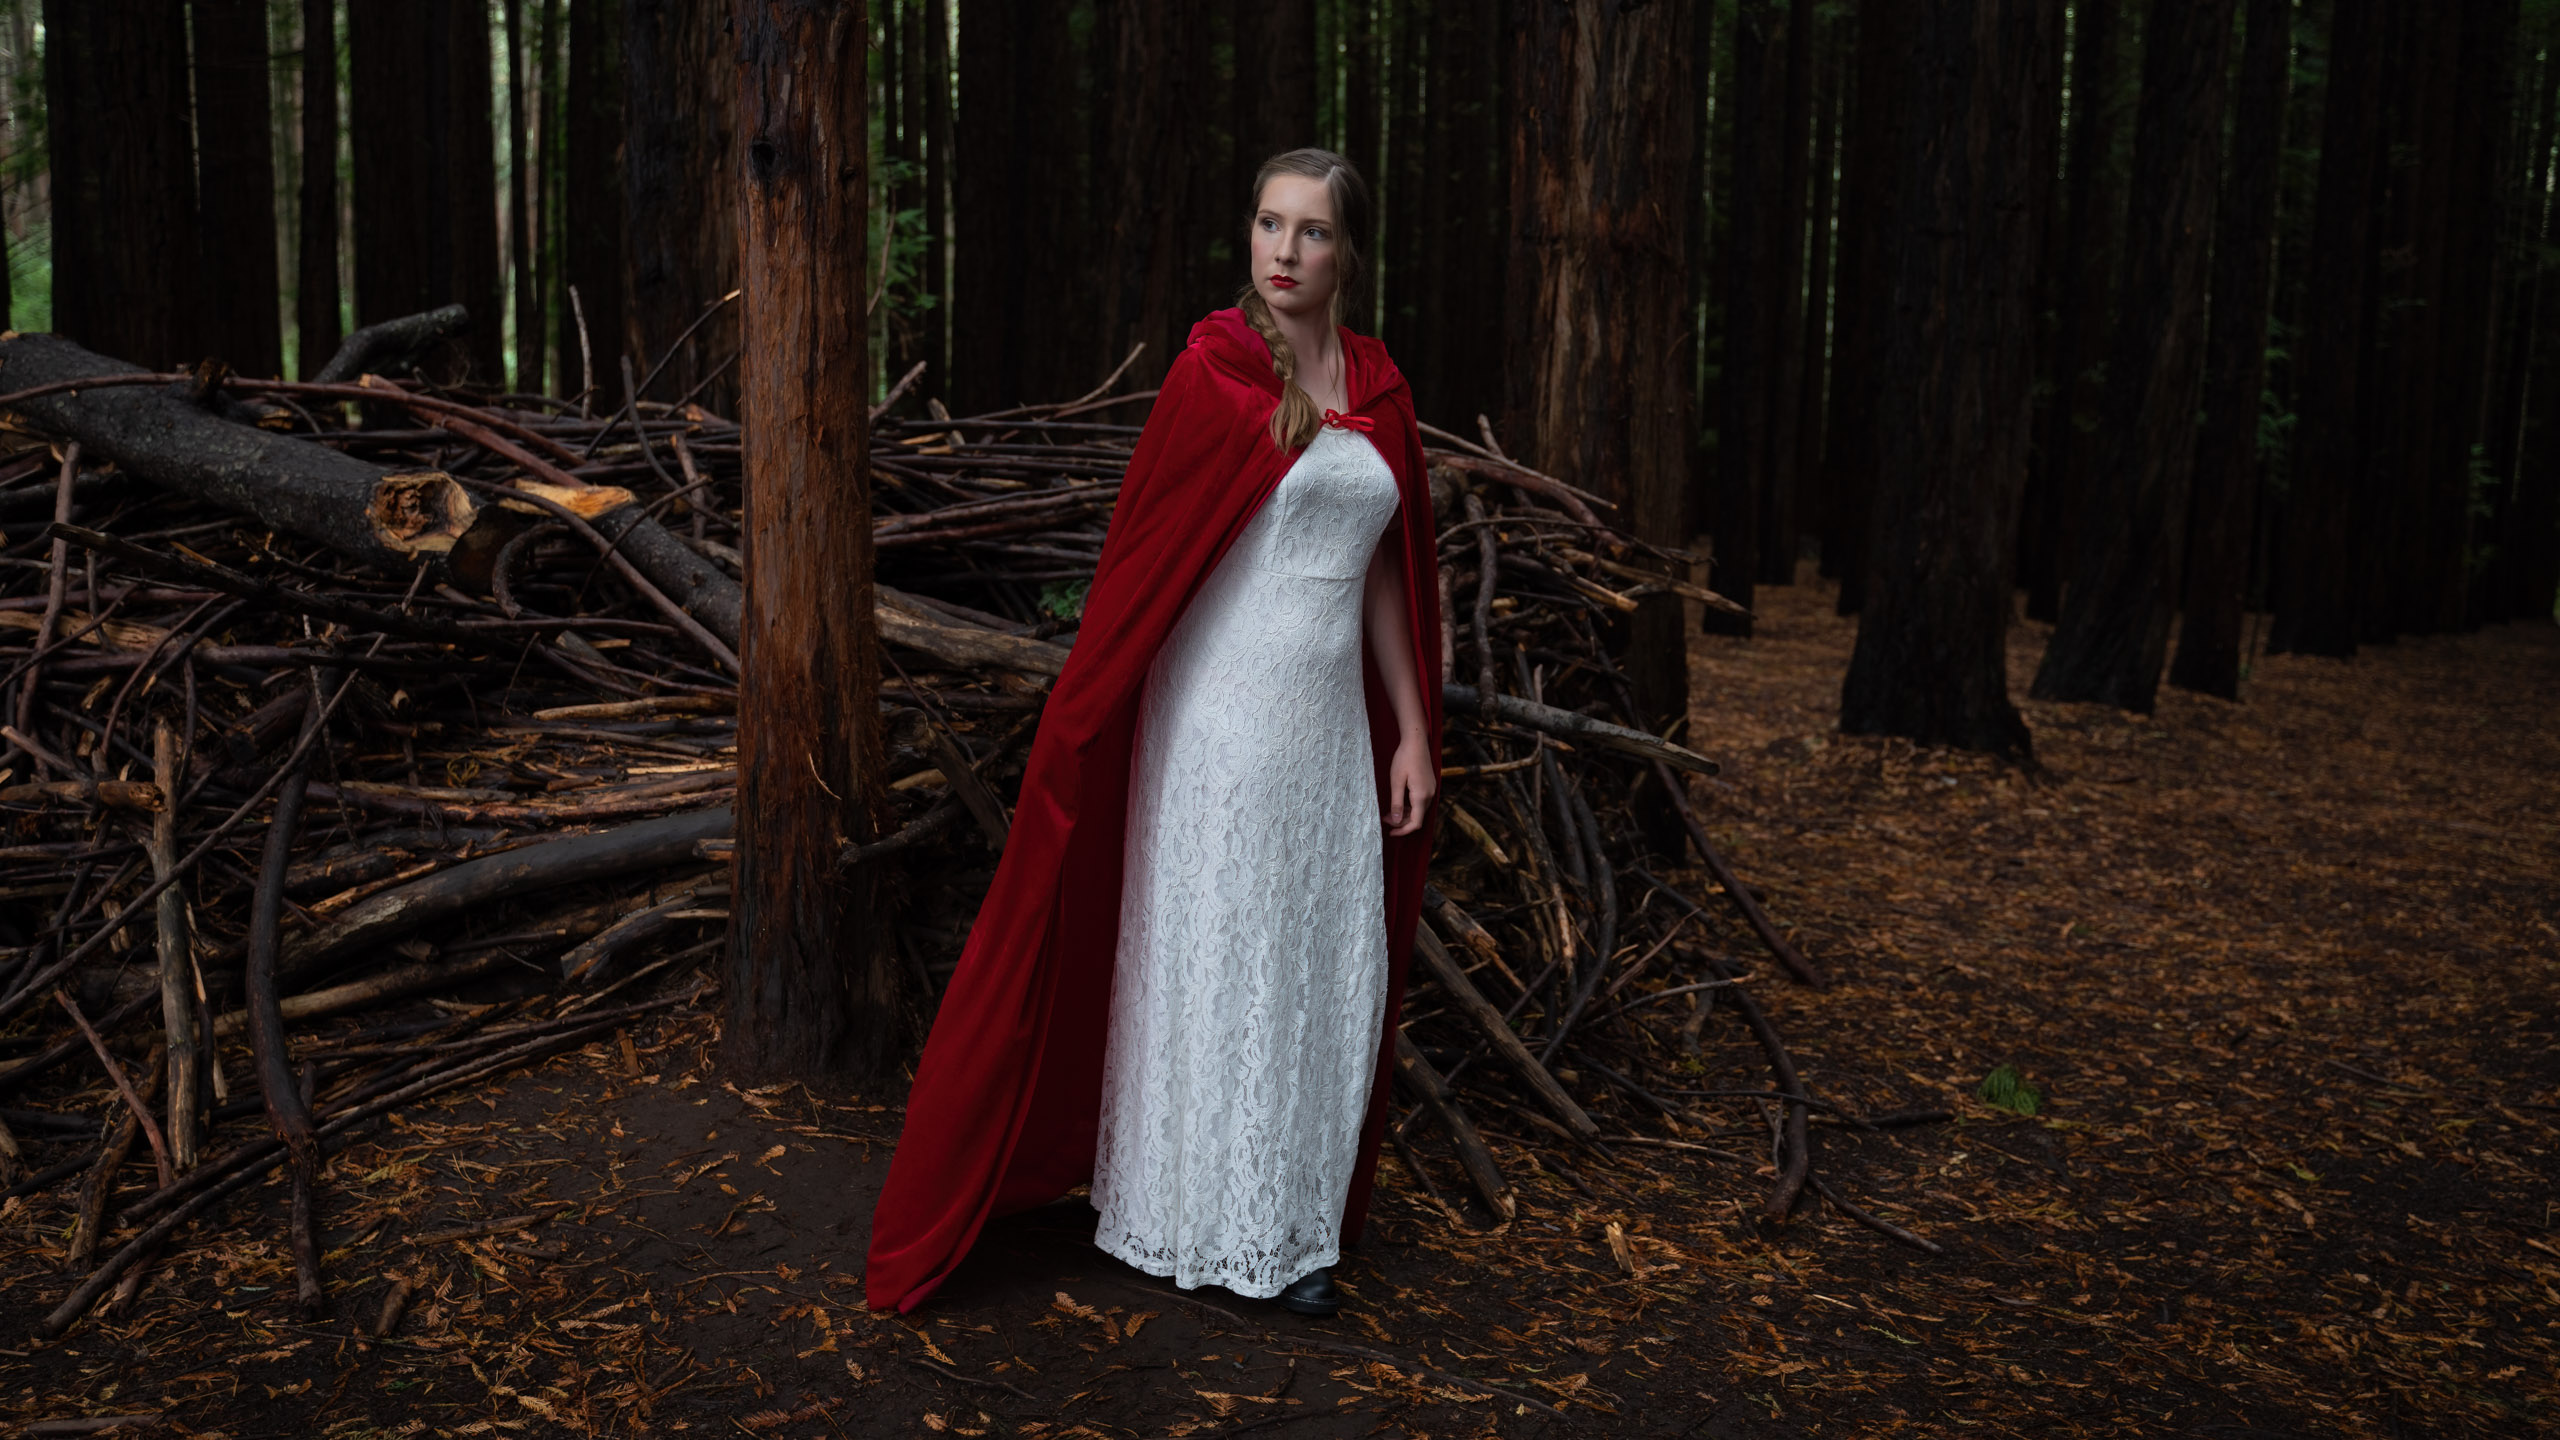 cameron santos recommends little red riding hood photoshoot pic